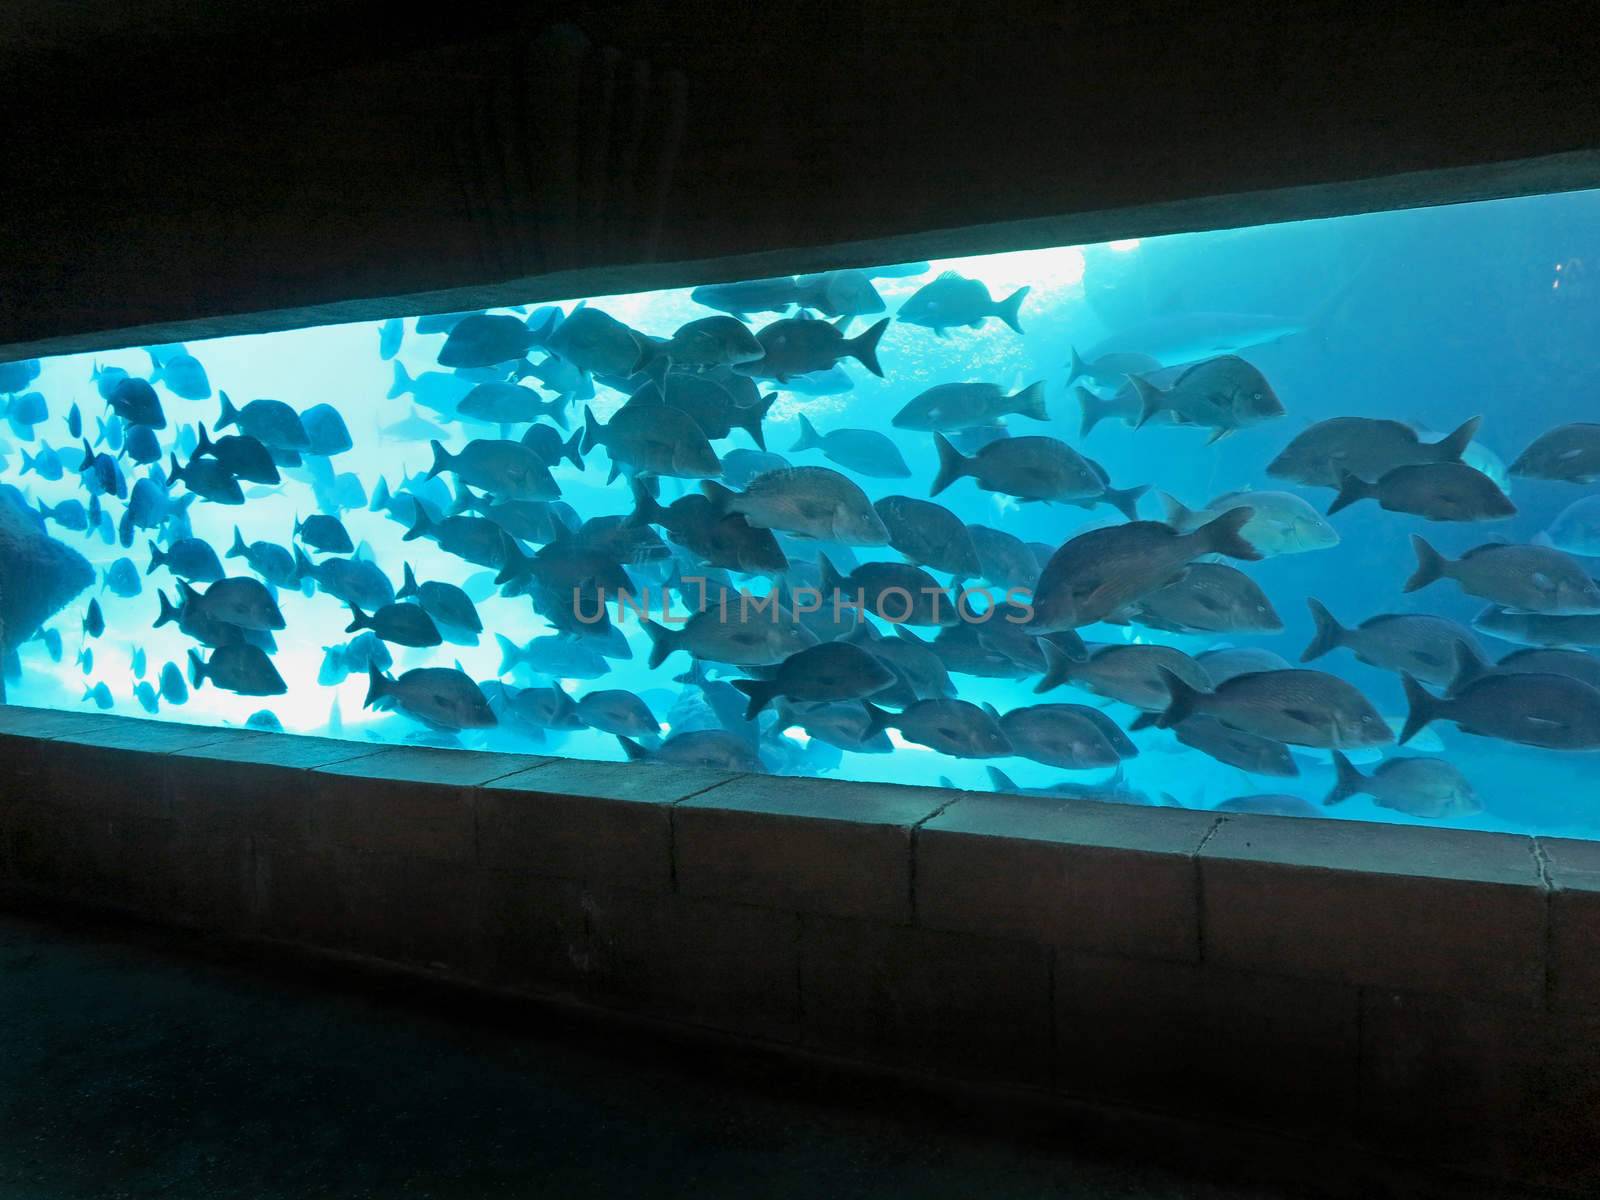 A large group of fish swimming in a tank